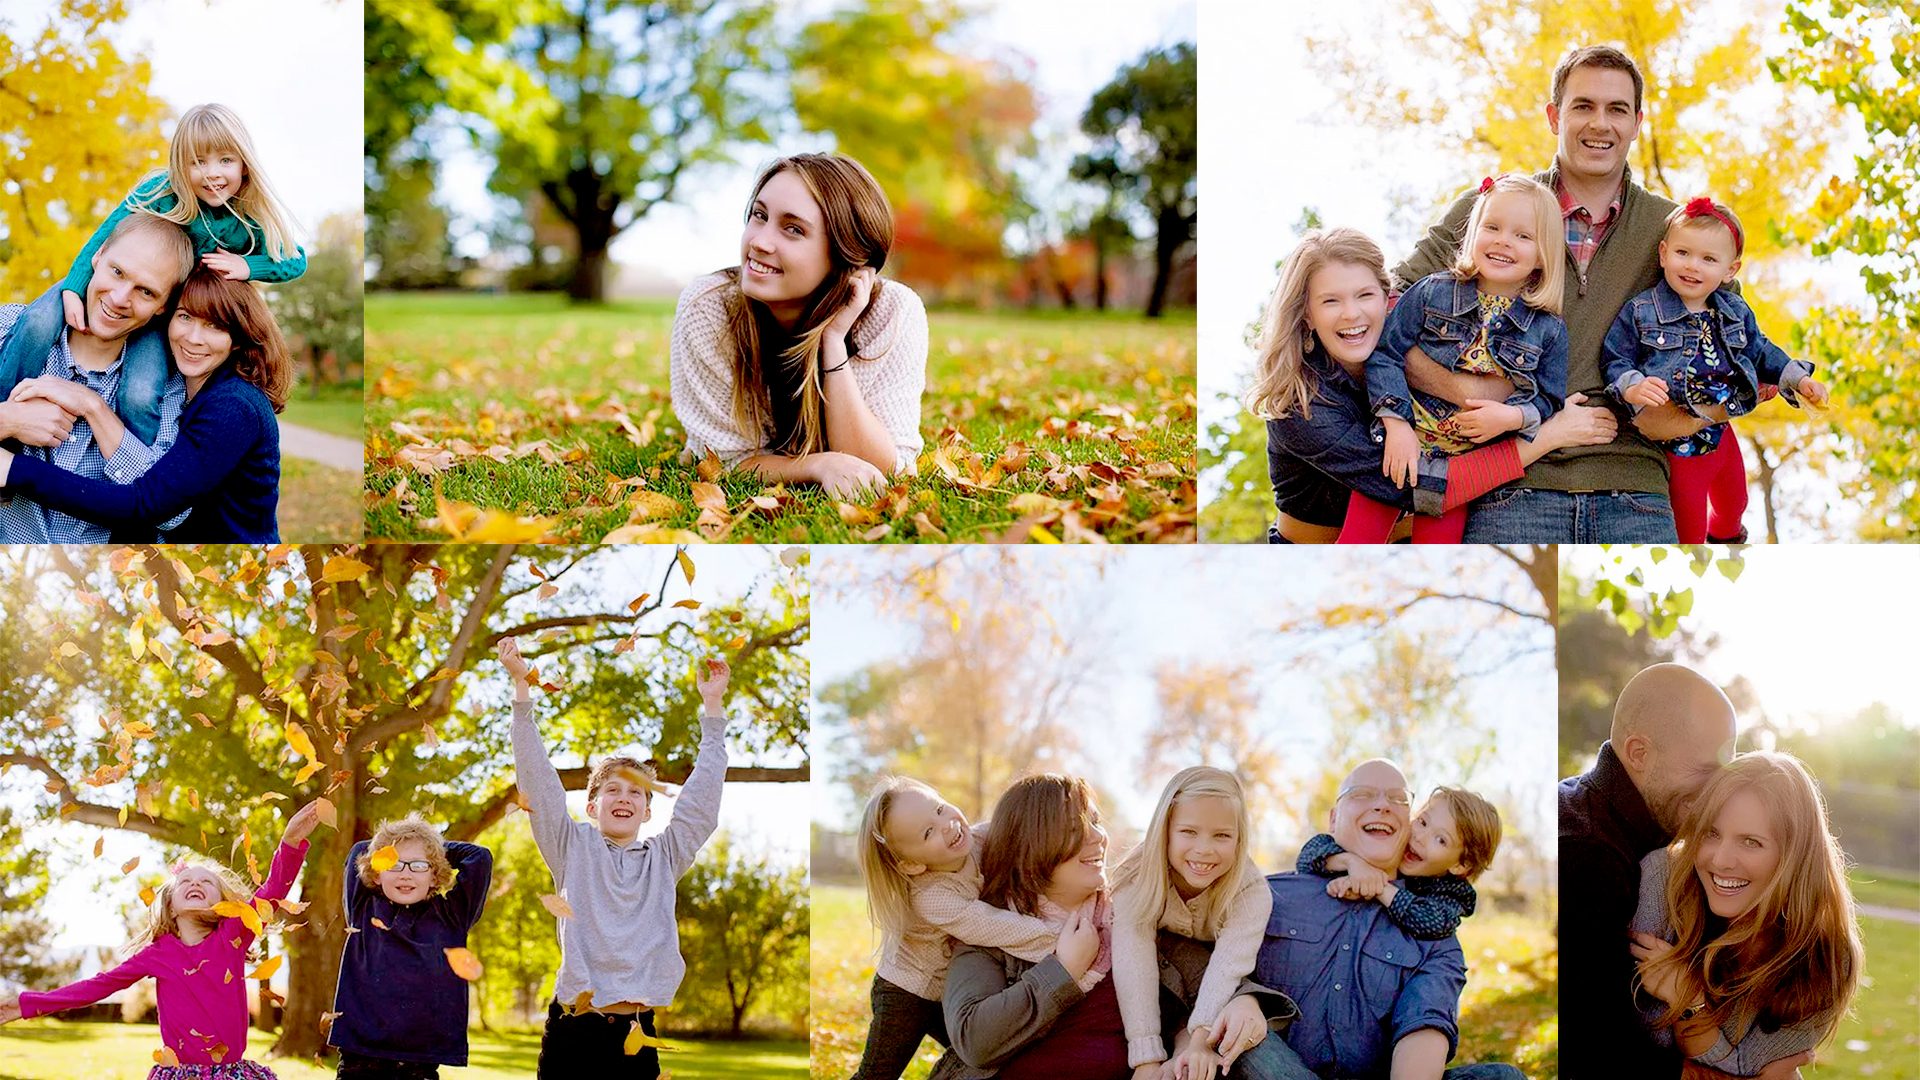 7 Tips To Take Advantage Of Autumn’s Goodness In Your Portrait Photography